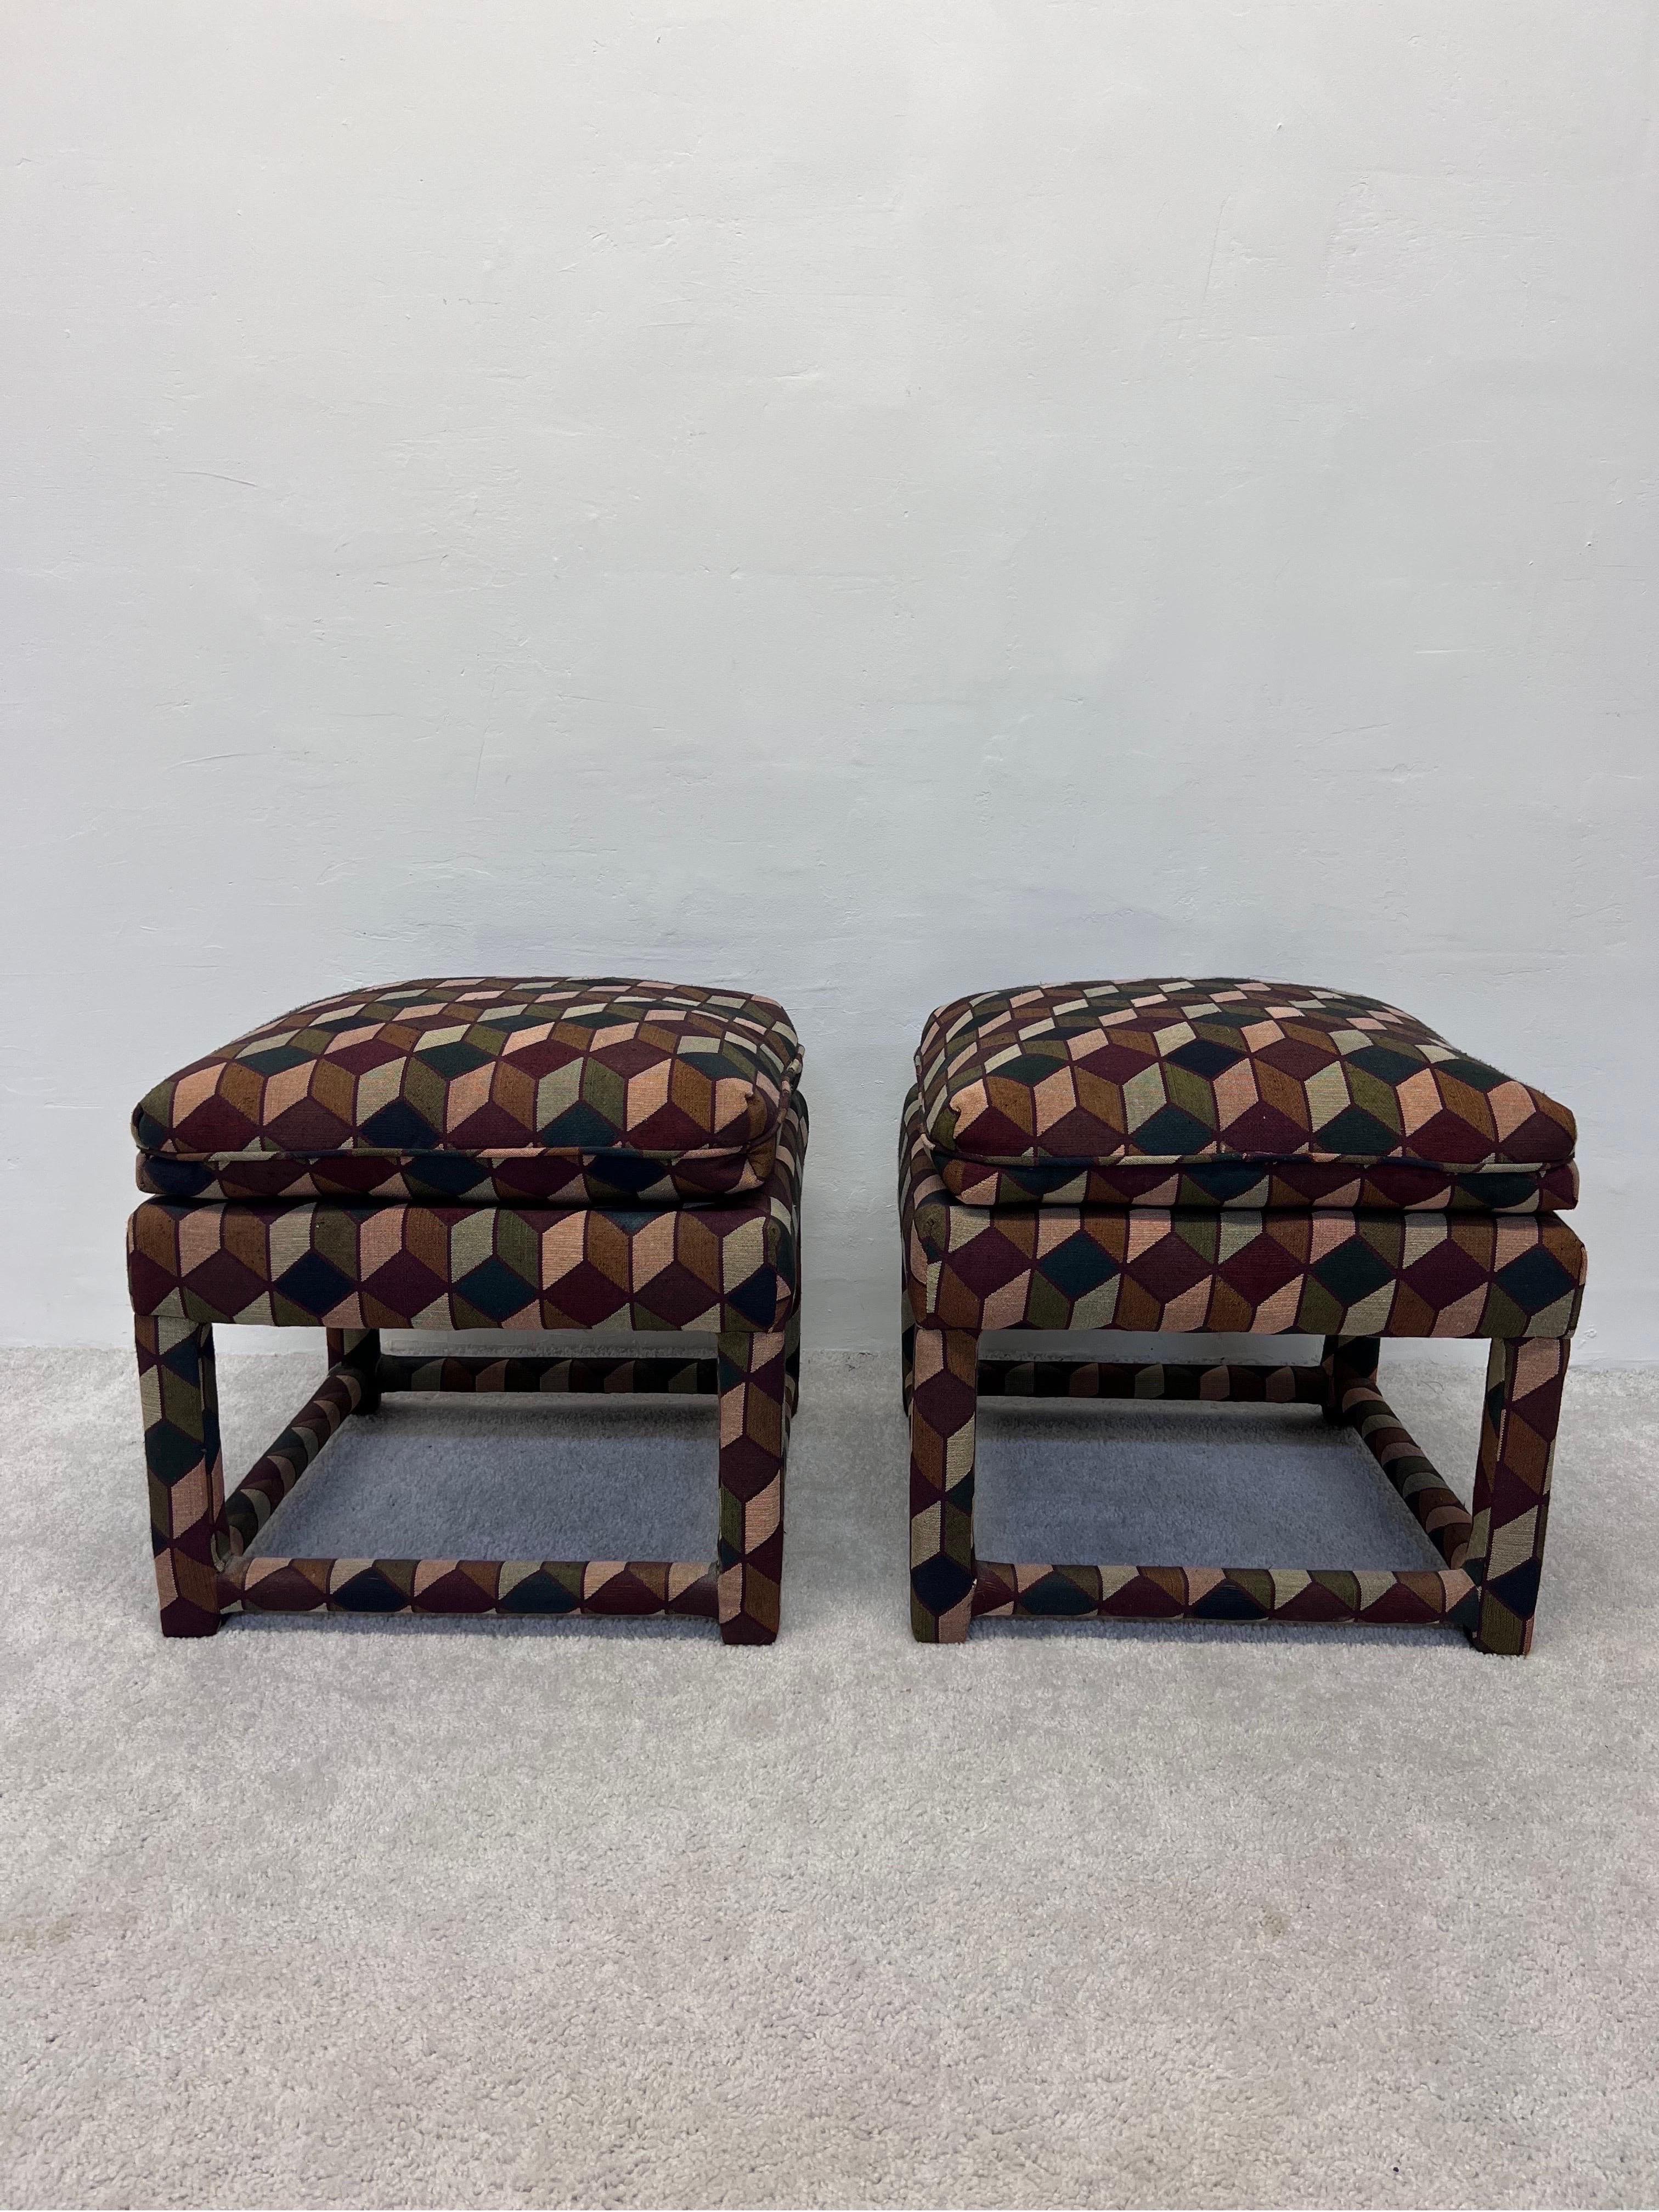 Pair of tumbling block pattern stools with down filled cushions from the 1970s.